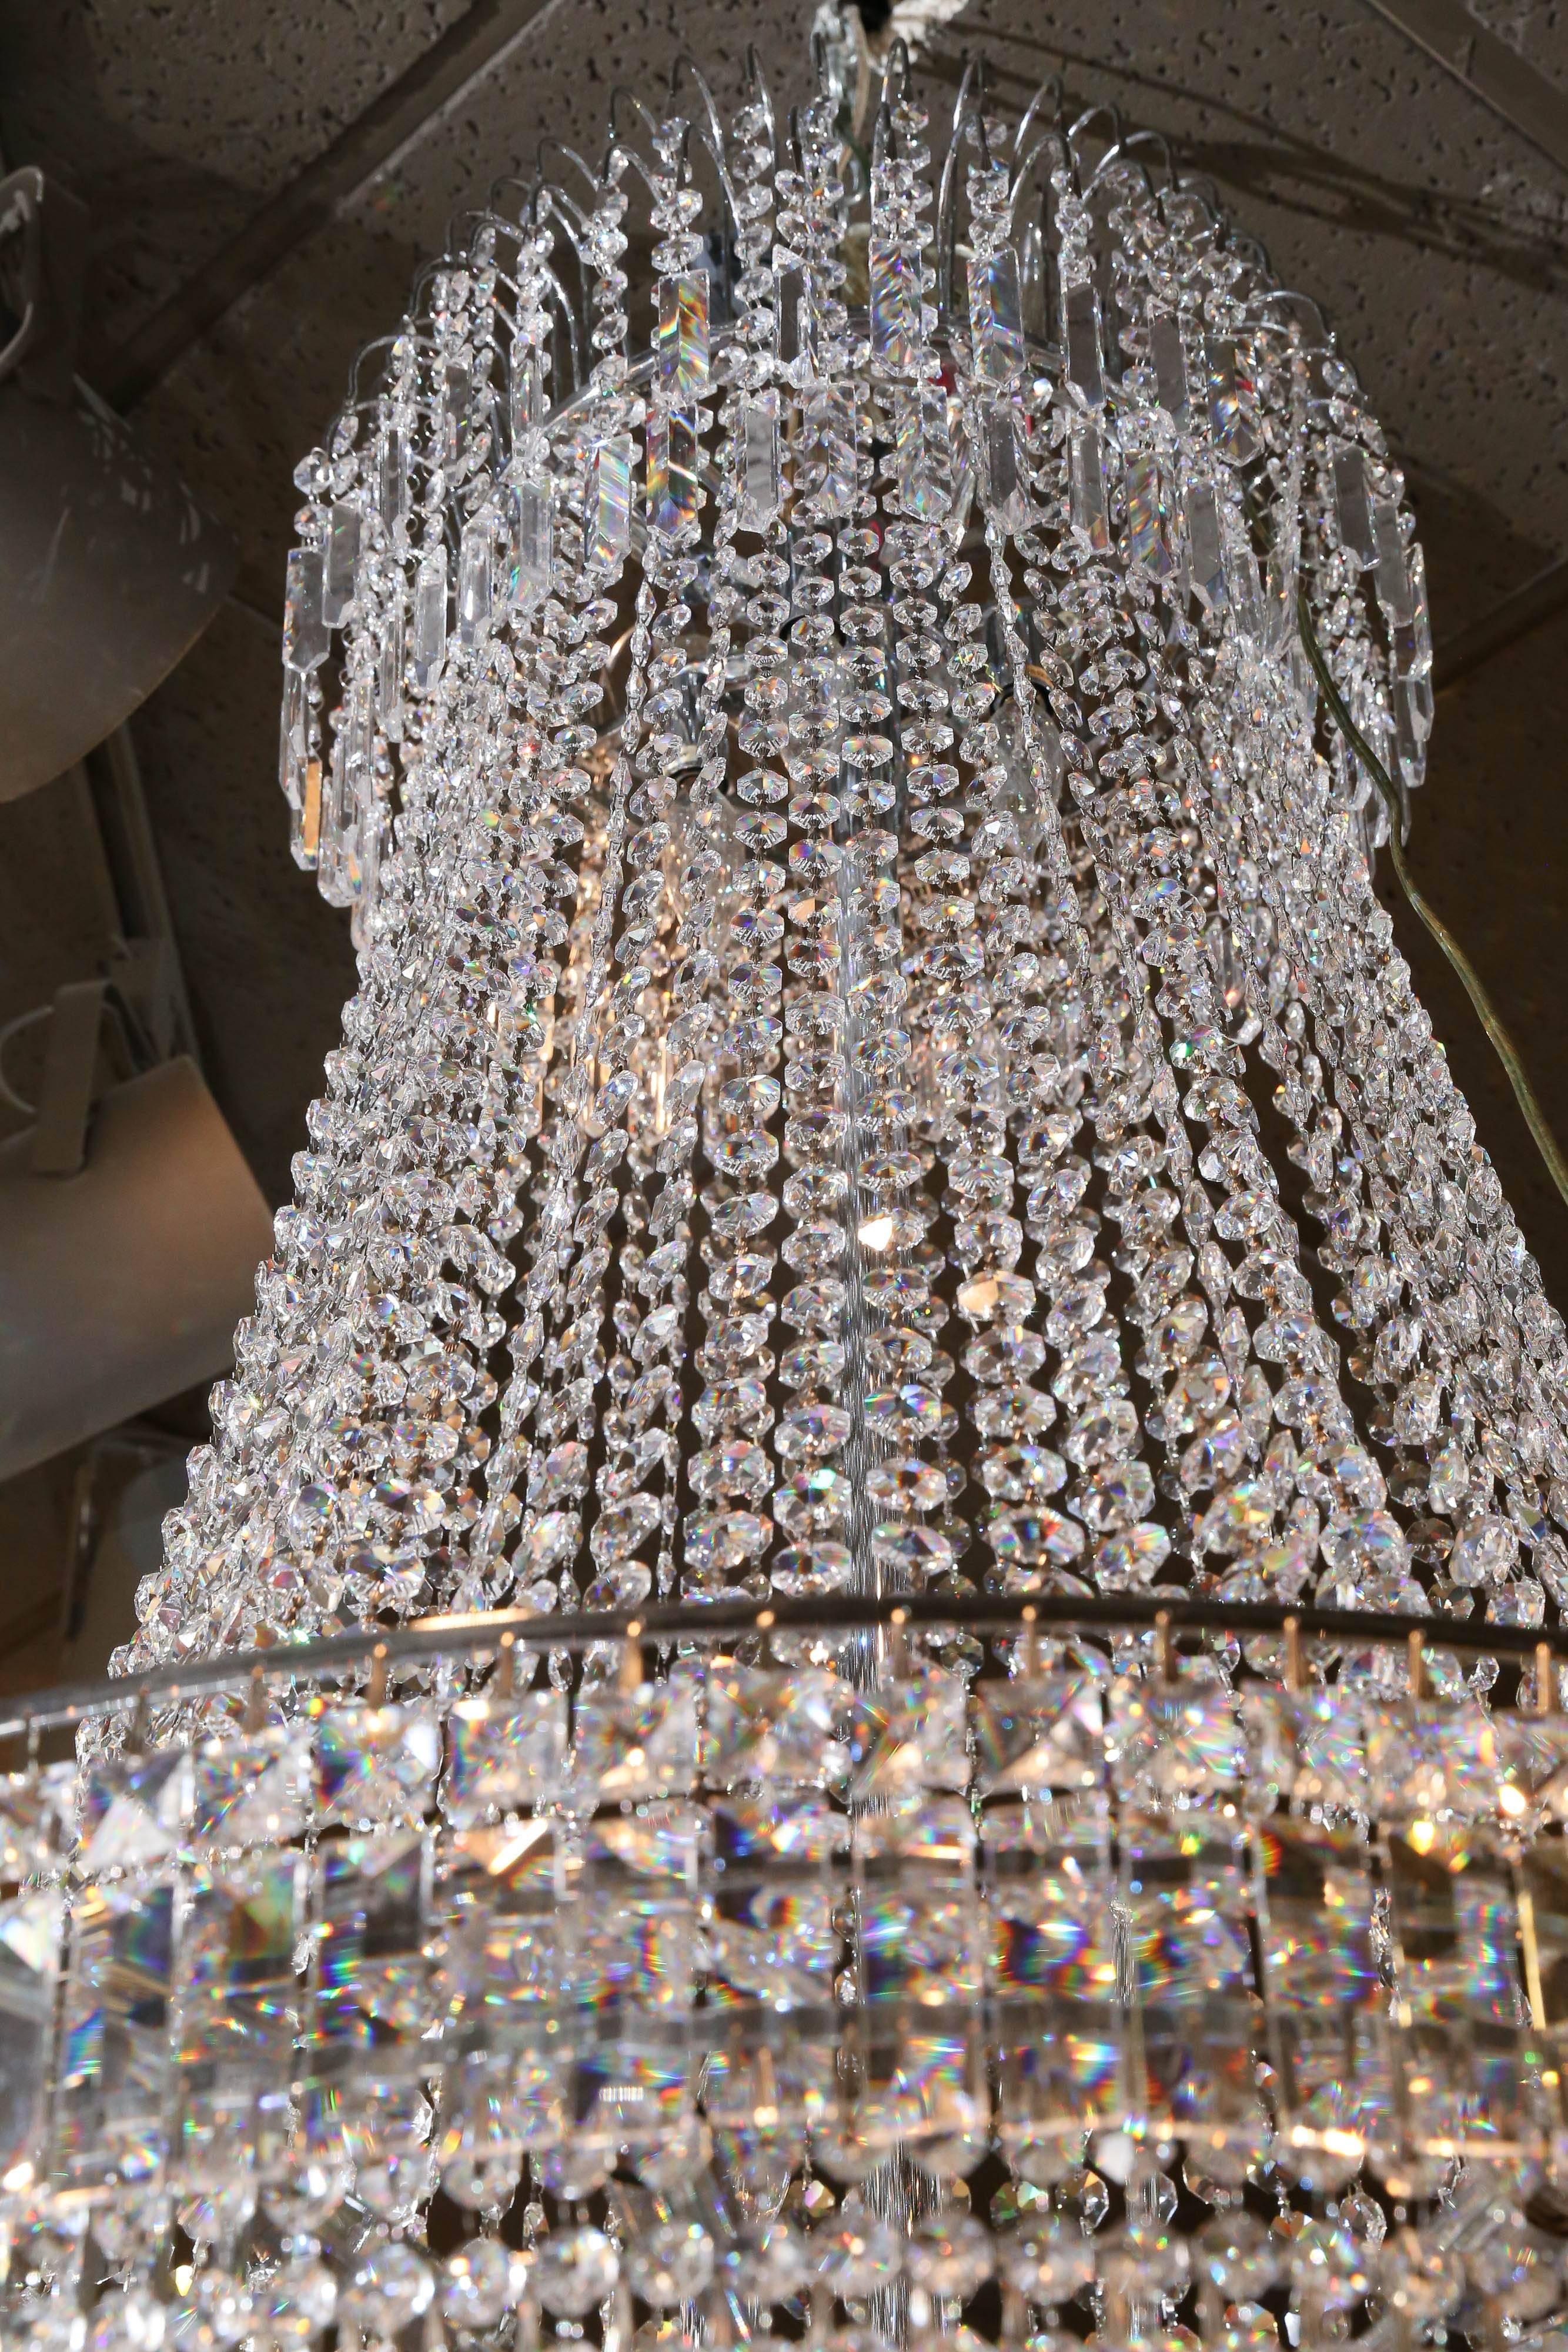 french empire style chandelier